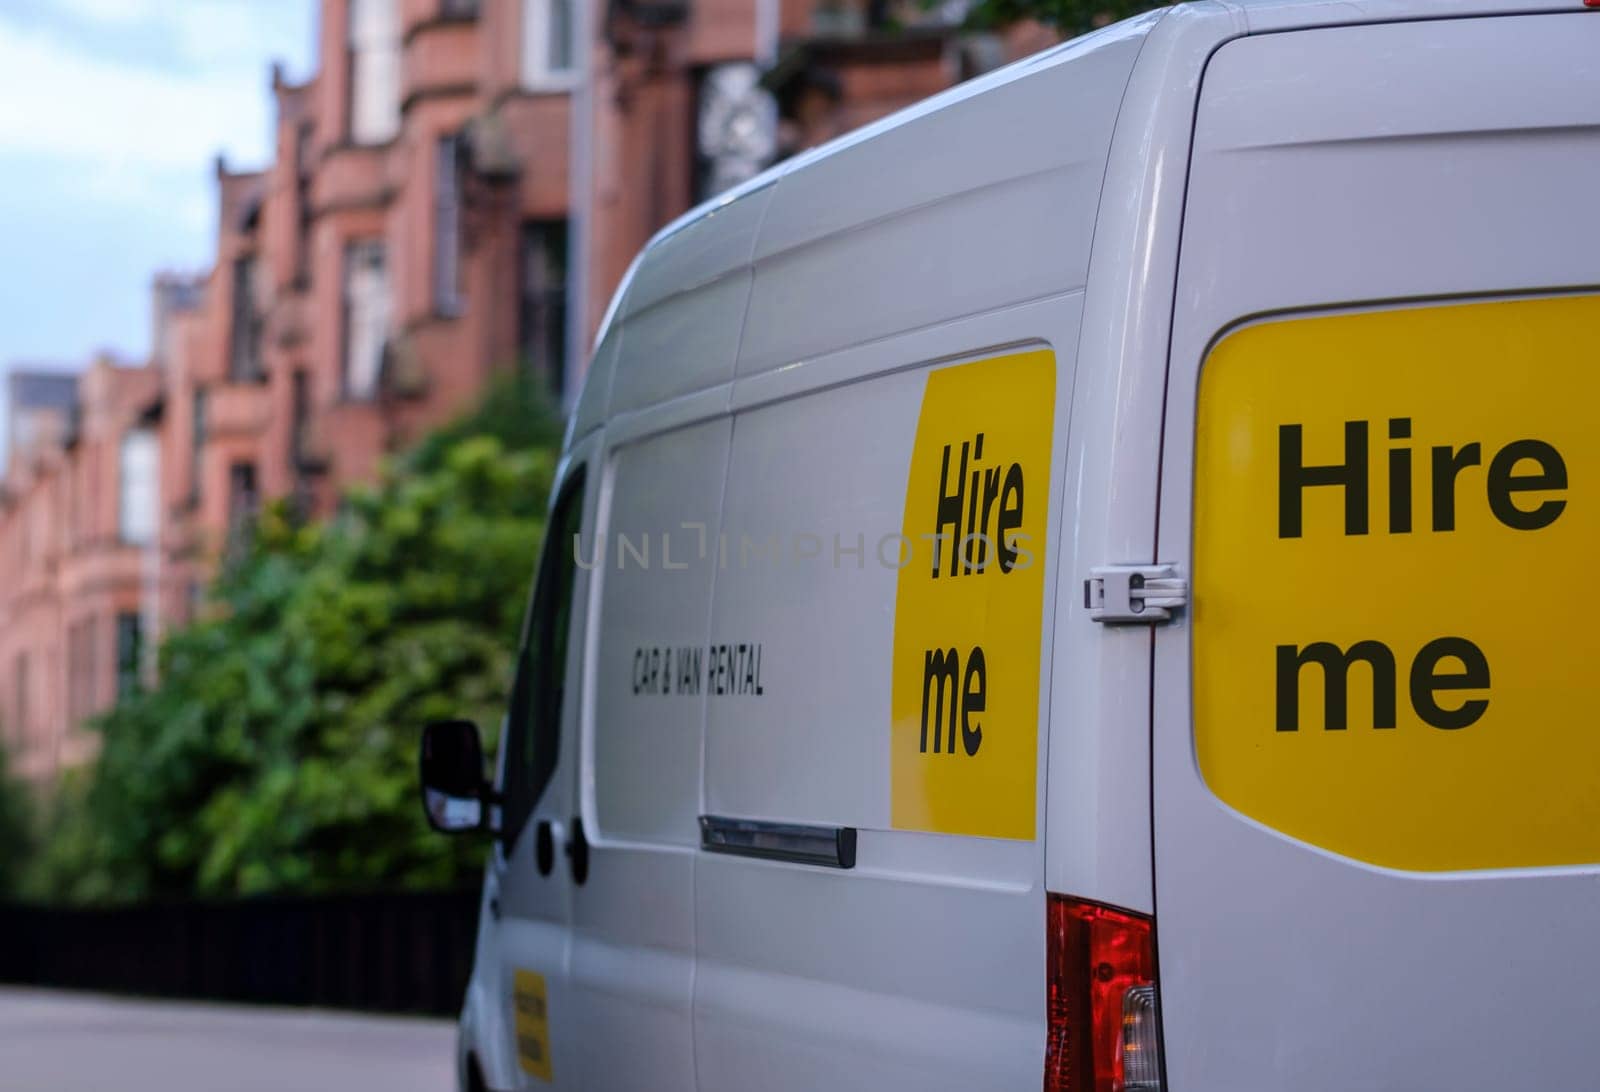 A Rental Van Or Truck With 'Hire Me' On The Side, Being Used To Move House Or Apartment In Glasgow, Scotland